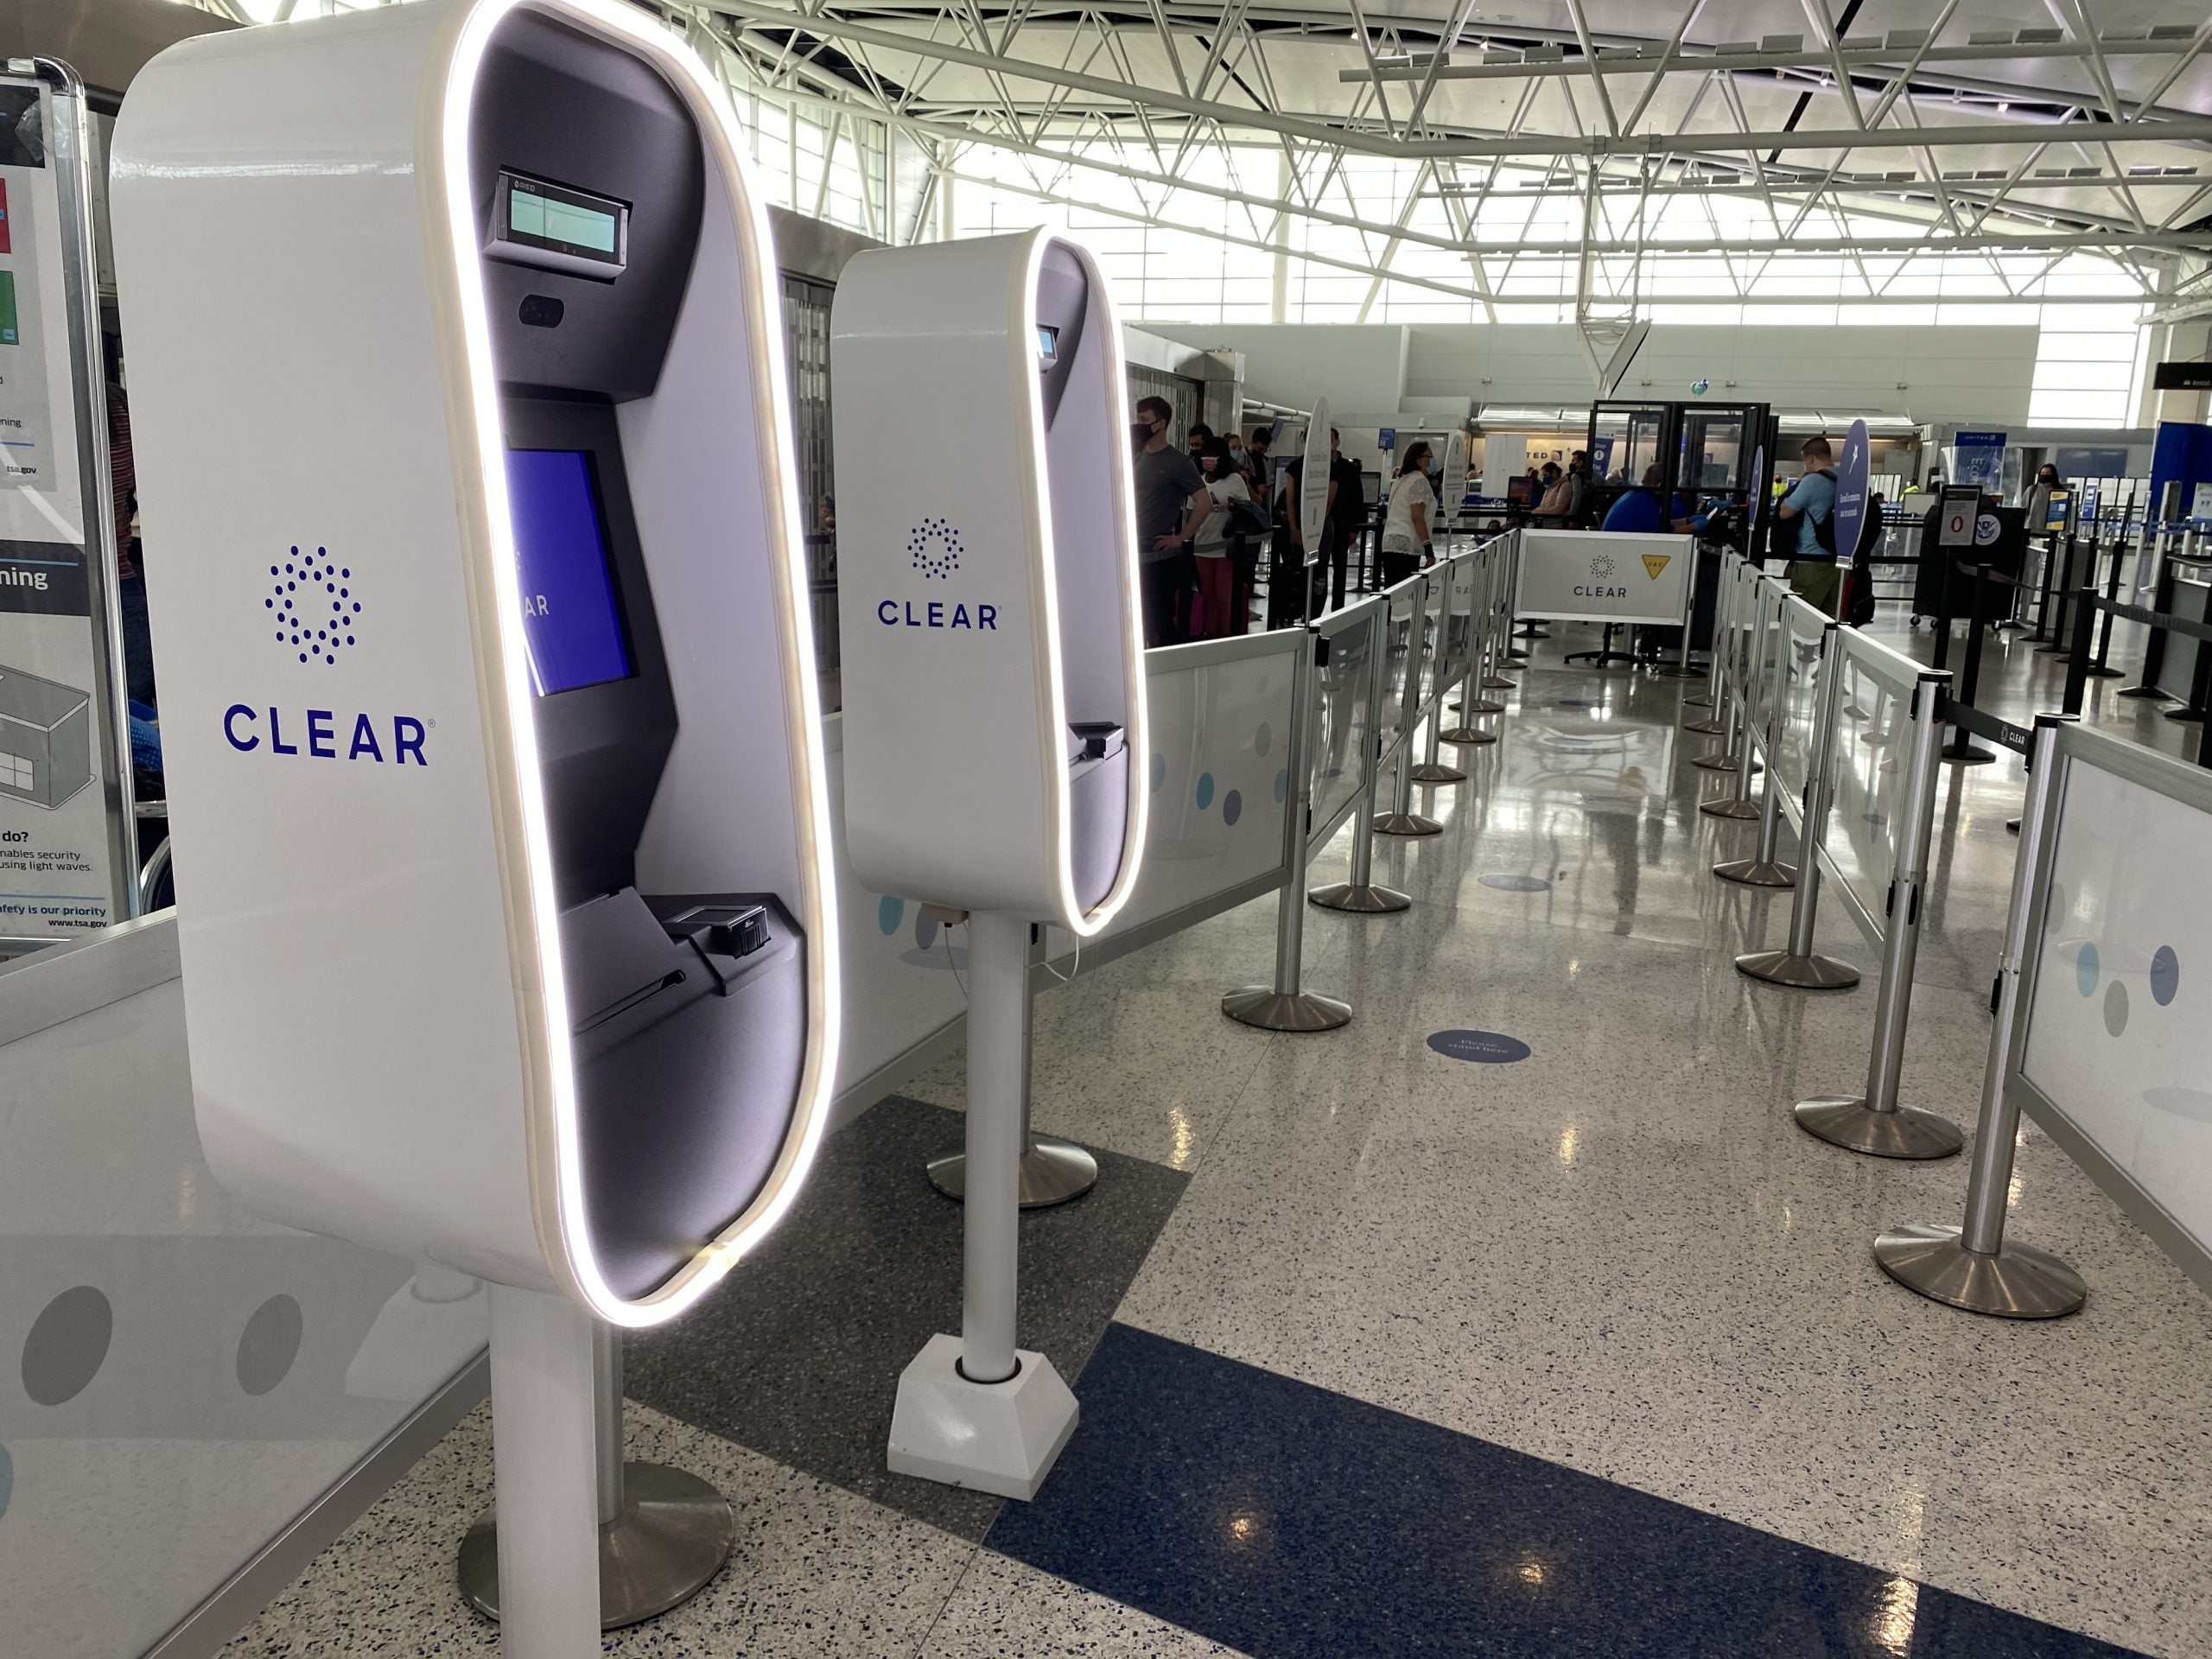 Clear kiosks at the airport